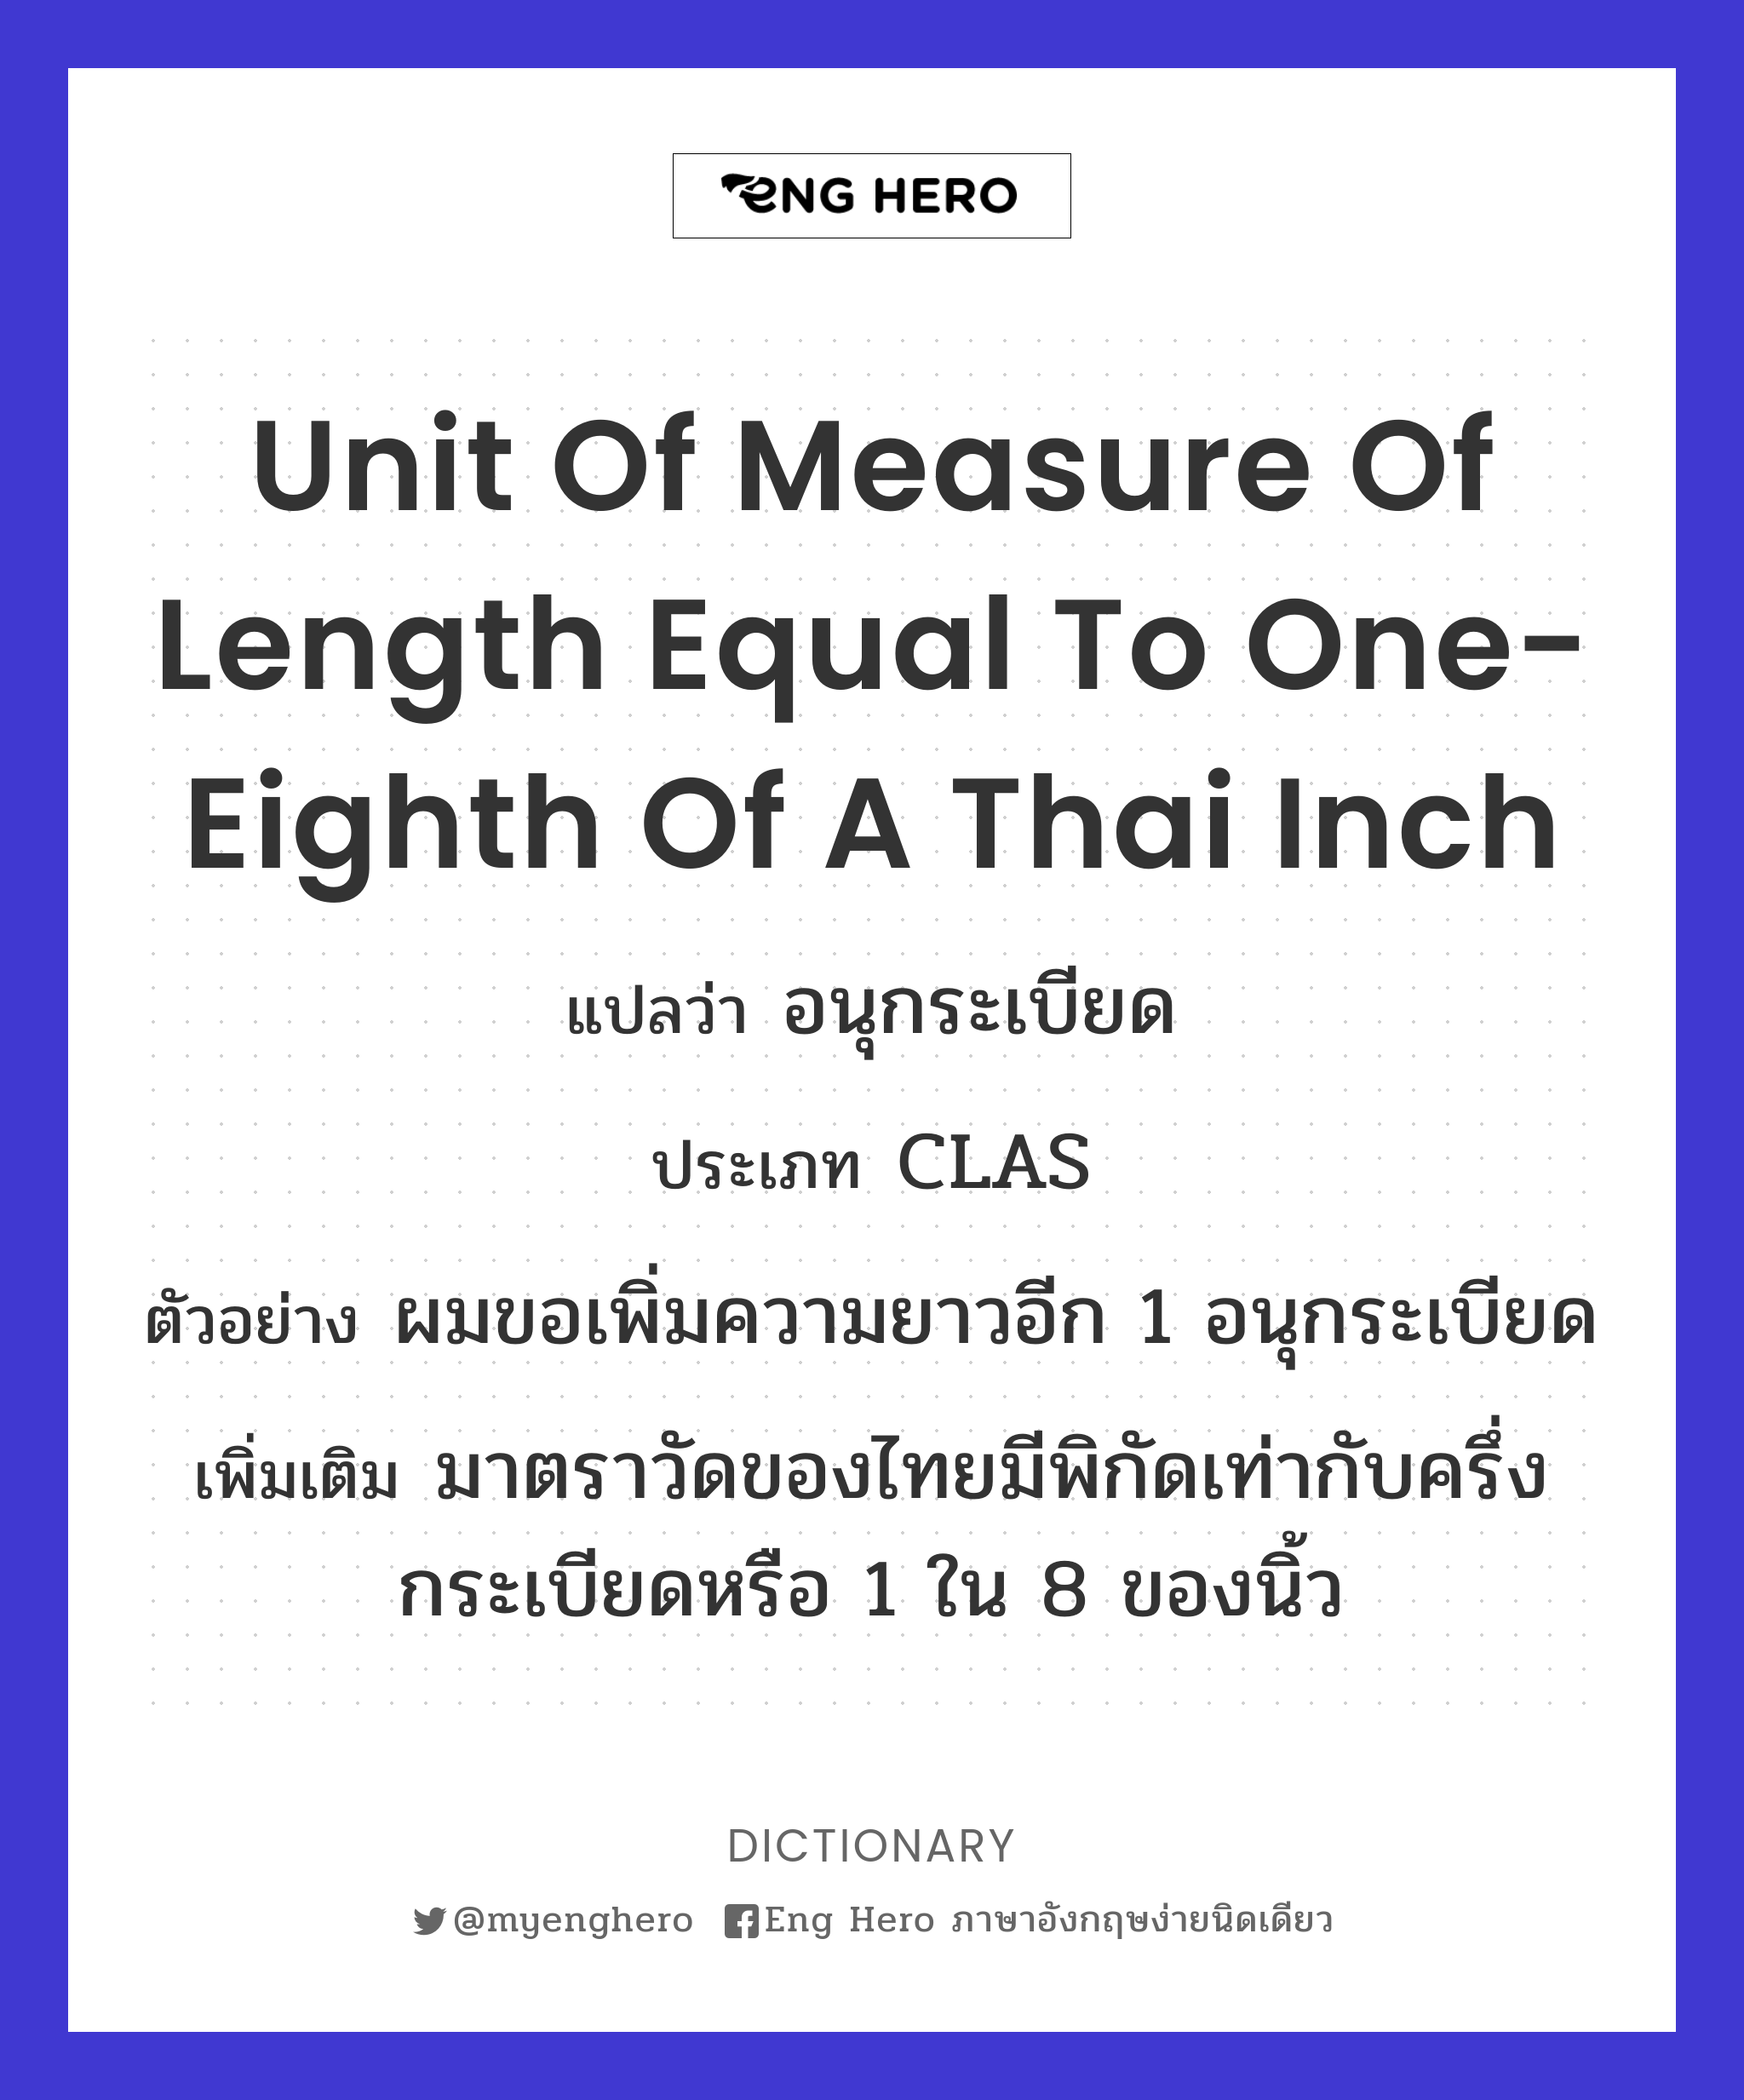 unit of measure of length equal to one-eighth of a Thai inch